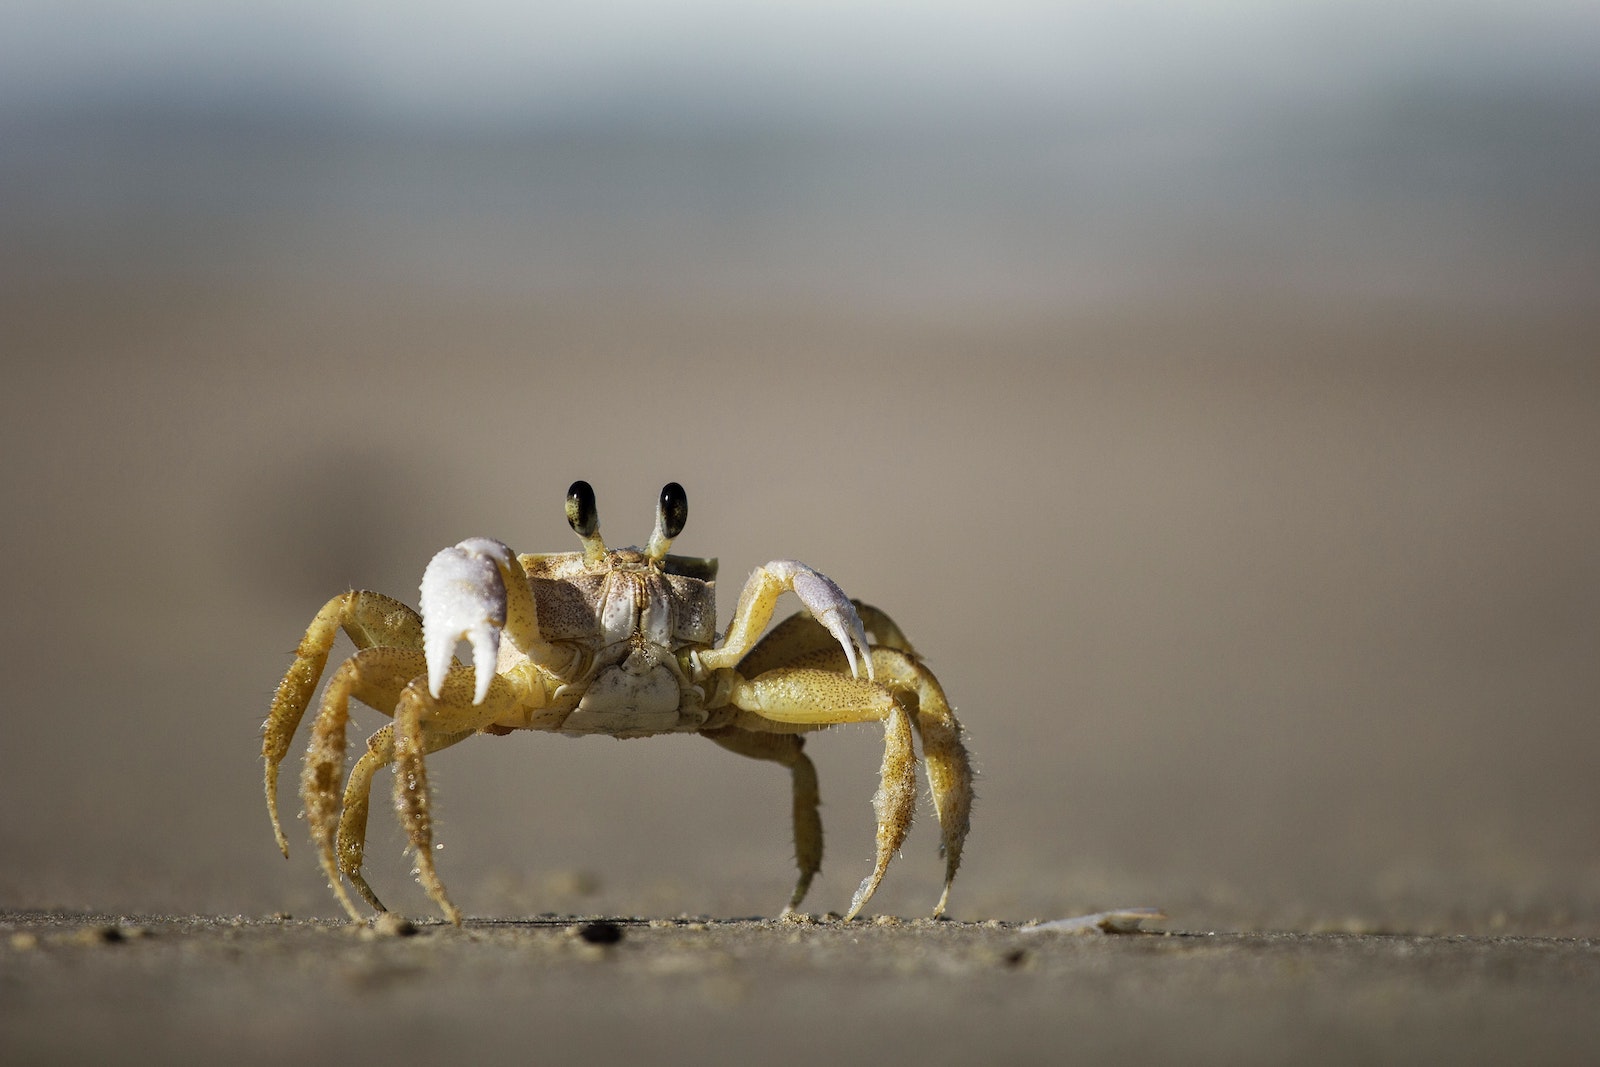 Bandit Crab: How (Not) To Social Distance